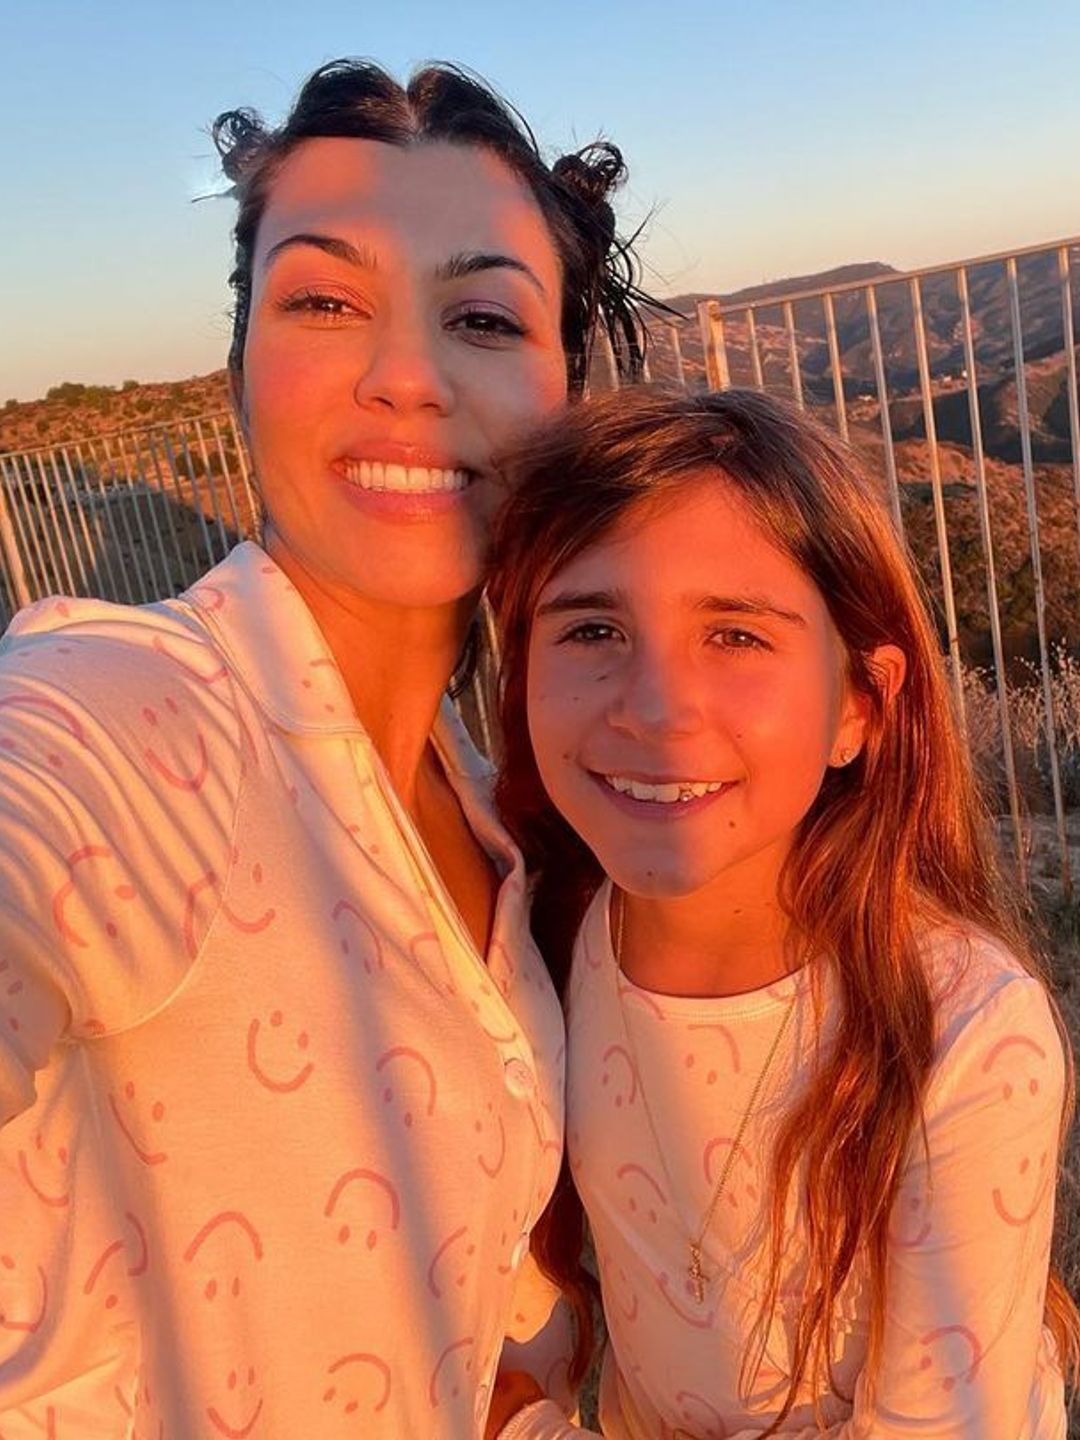 Kourtney with her daughter Penelope posing for a selfie at dawn